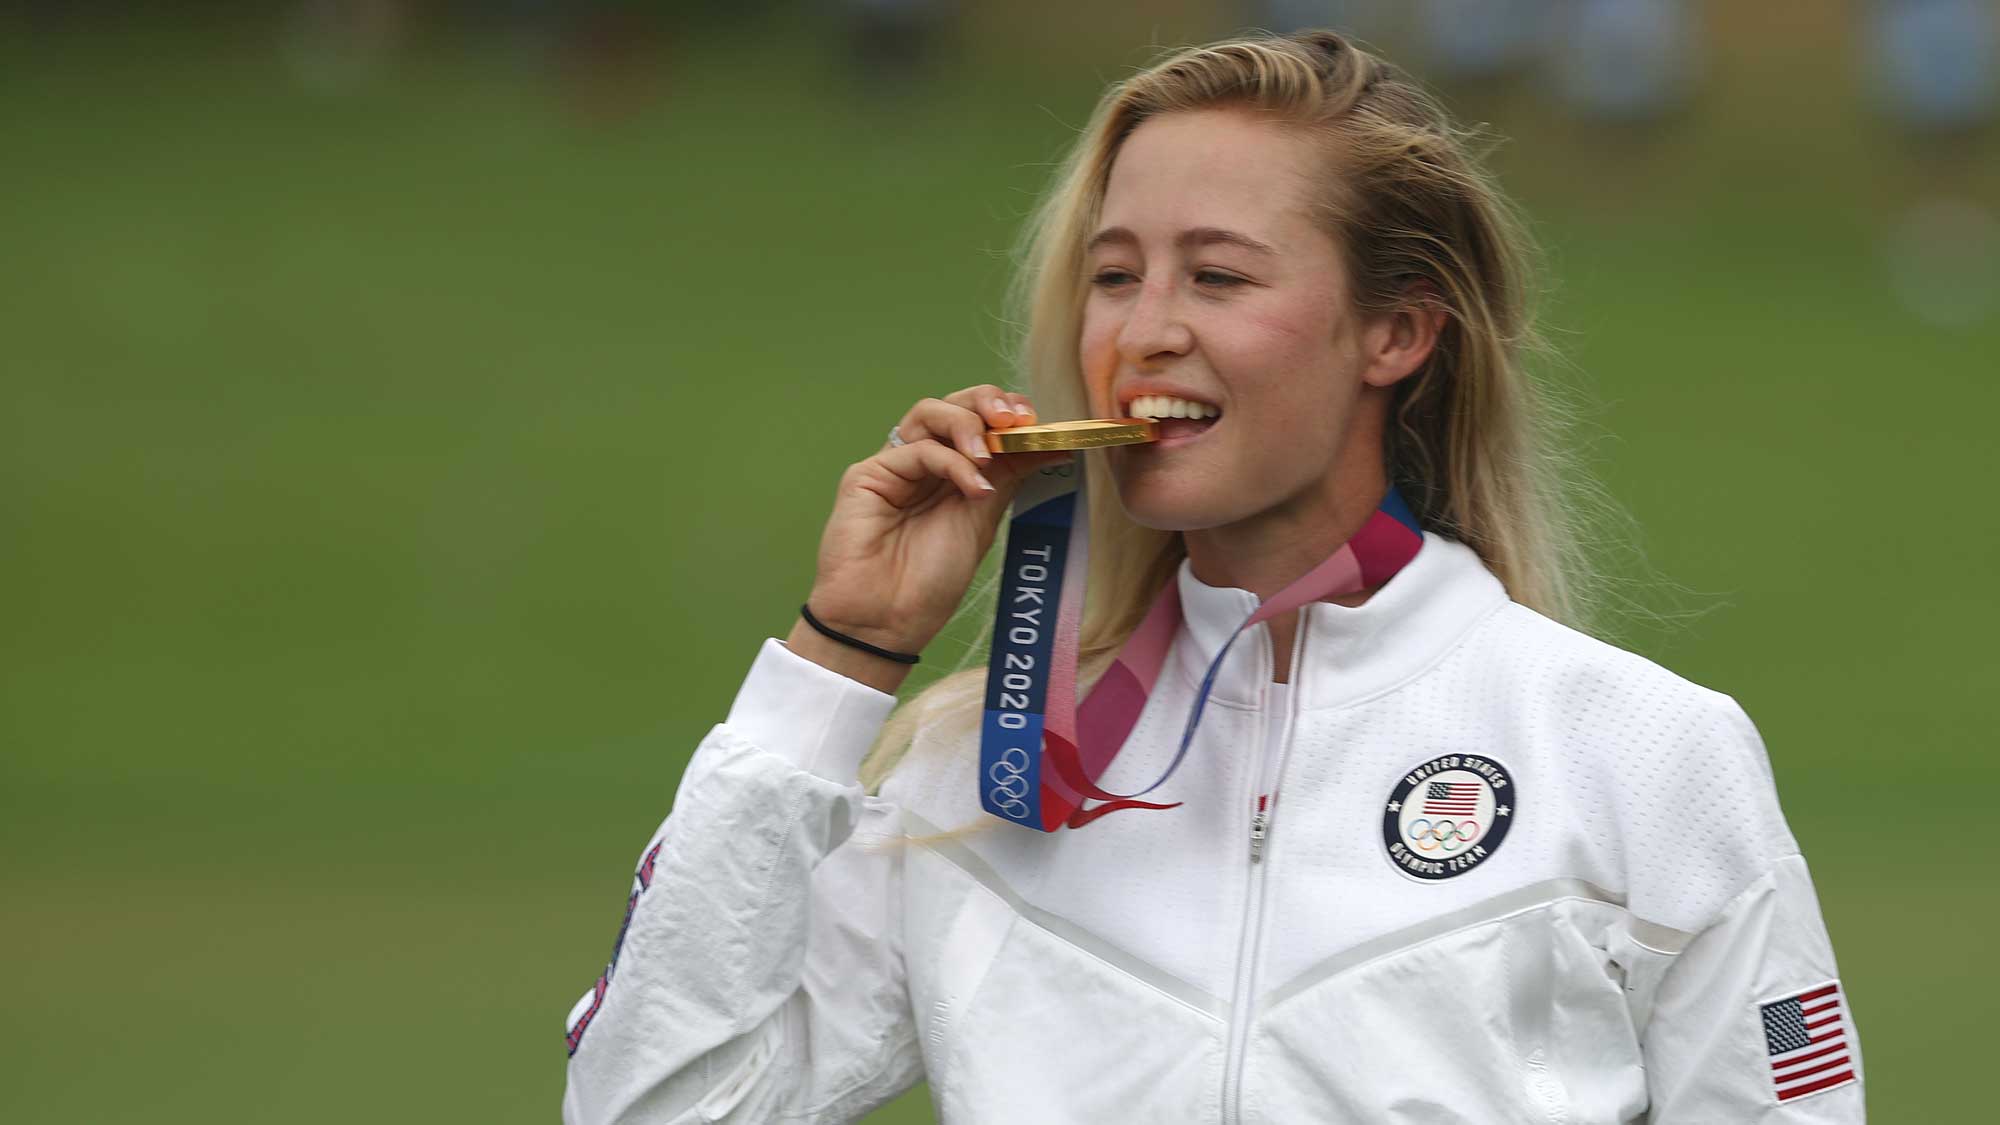 Nelly Korda with gold medal